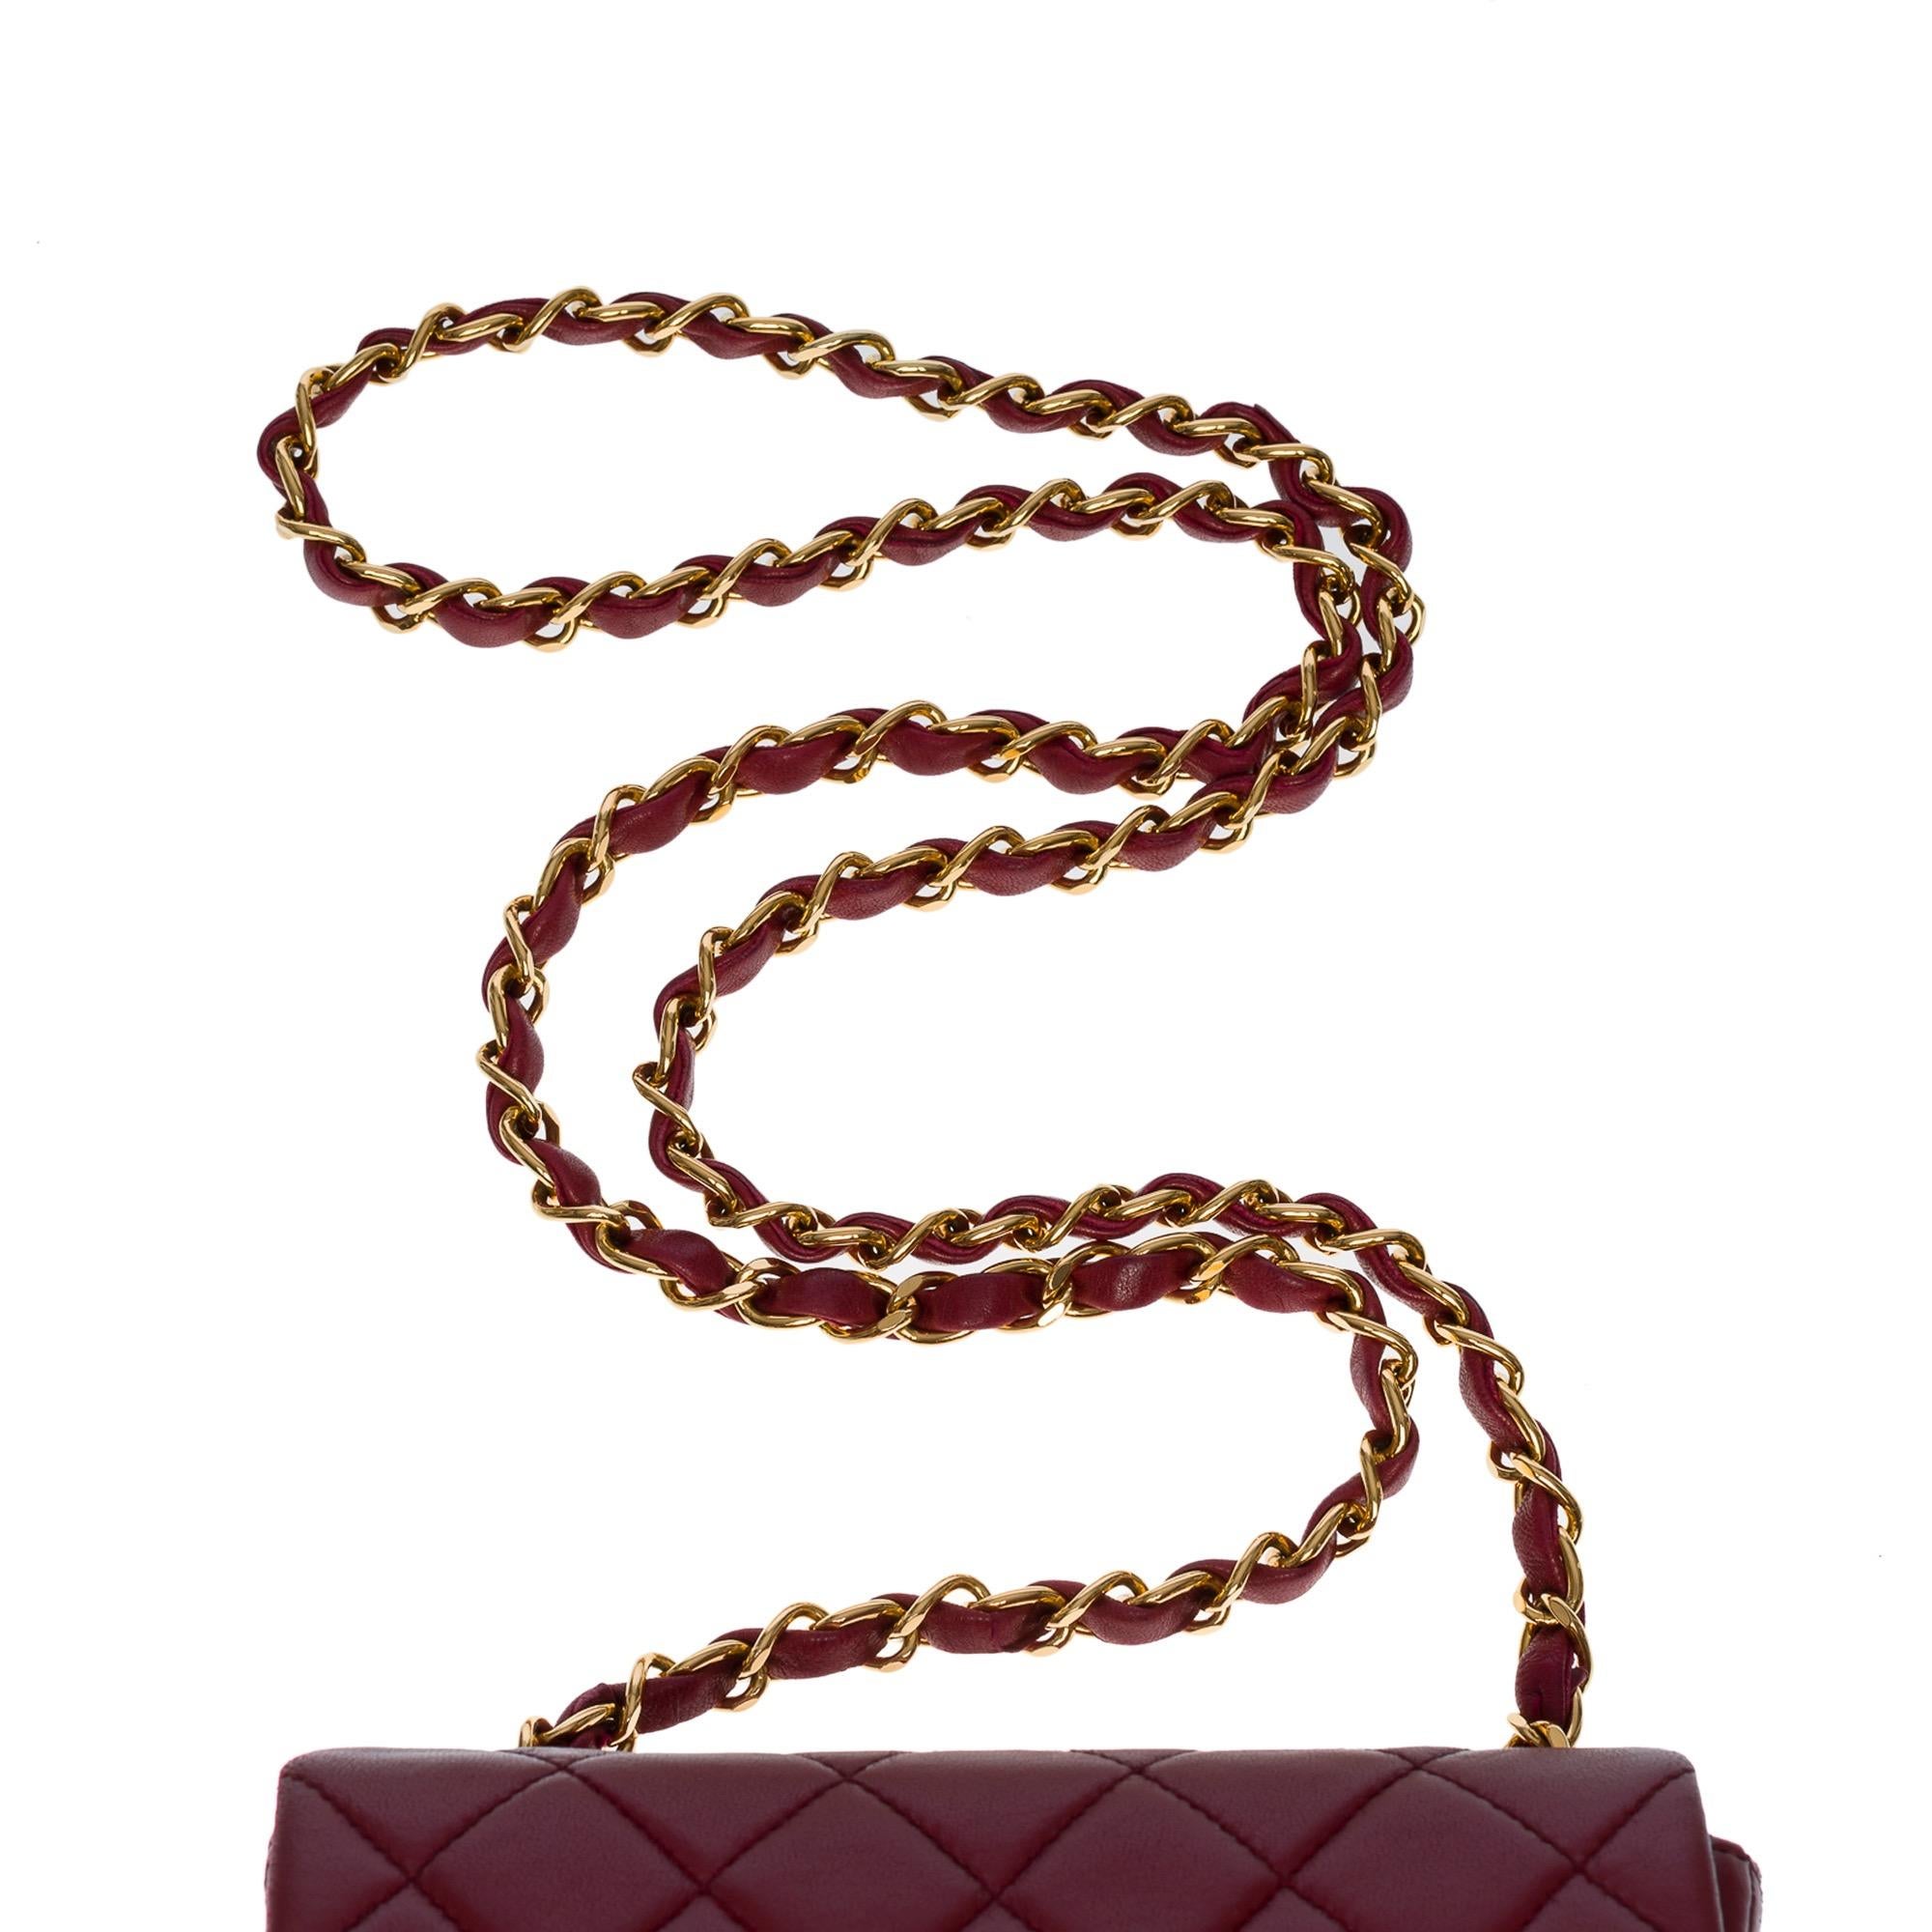 Splendid Chanel Timeless Mini flap bag in burgundy quilted leather, GHW 1